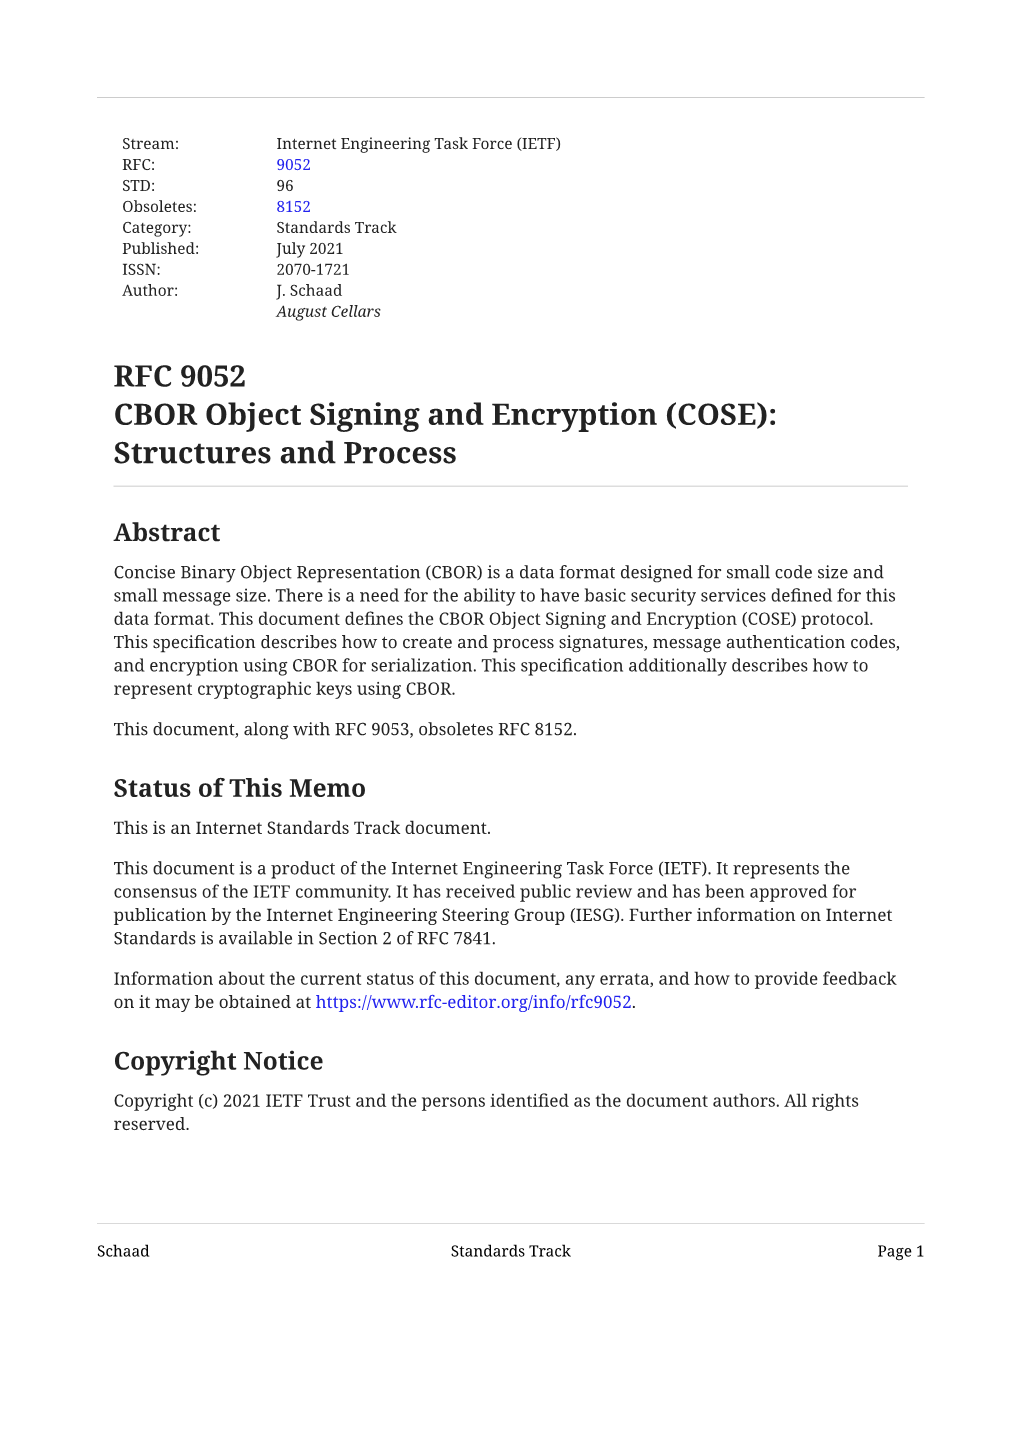 RFC 9052: CBOR Object Signing and Encryption (COSE): Structures And